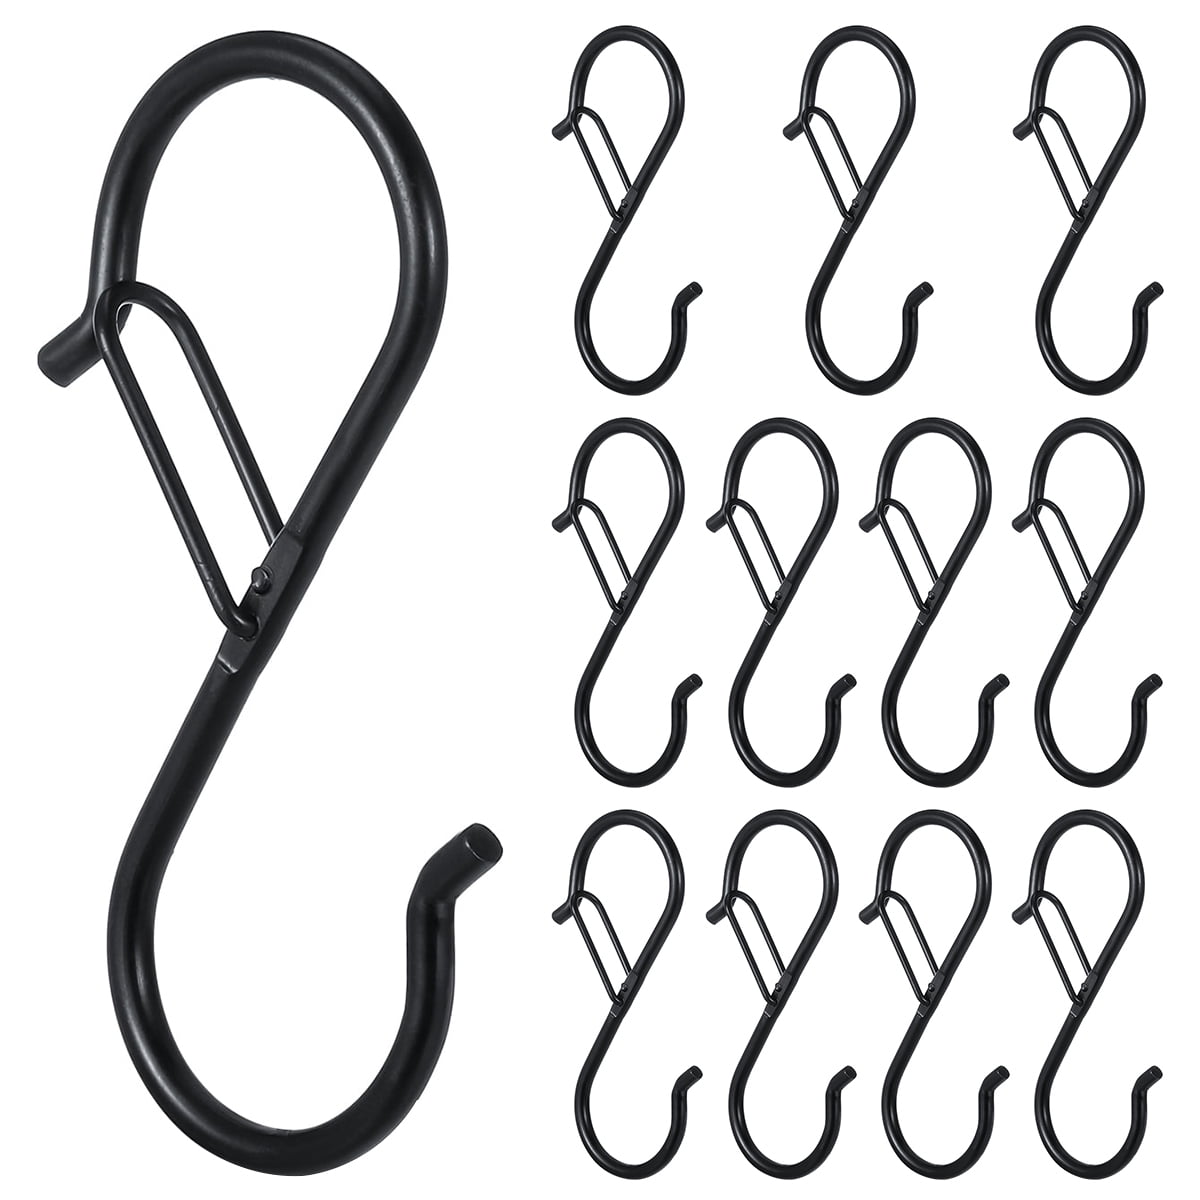 Kyoffiie S Hooks for Hanging 12 Pack 3.5inch S Shaped Hooks for Hanging ...